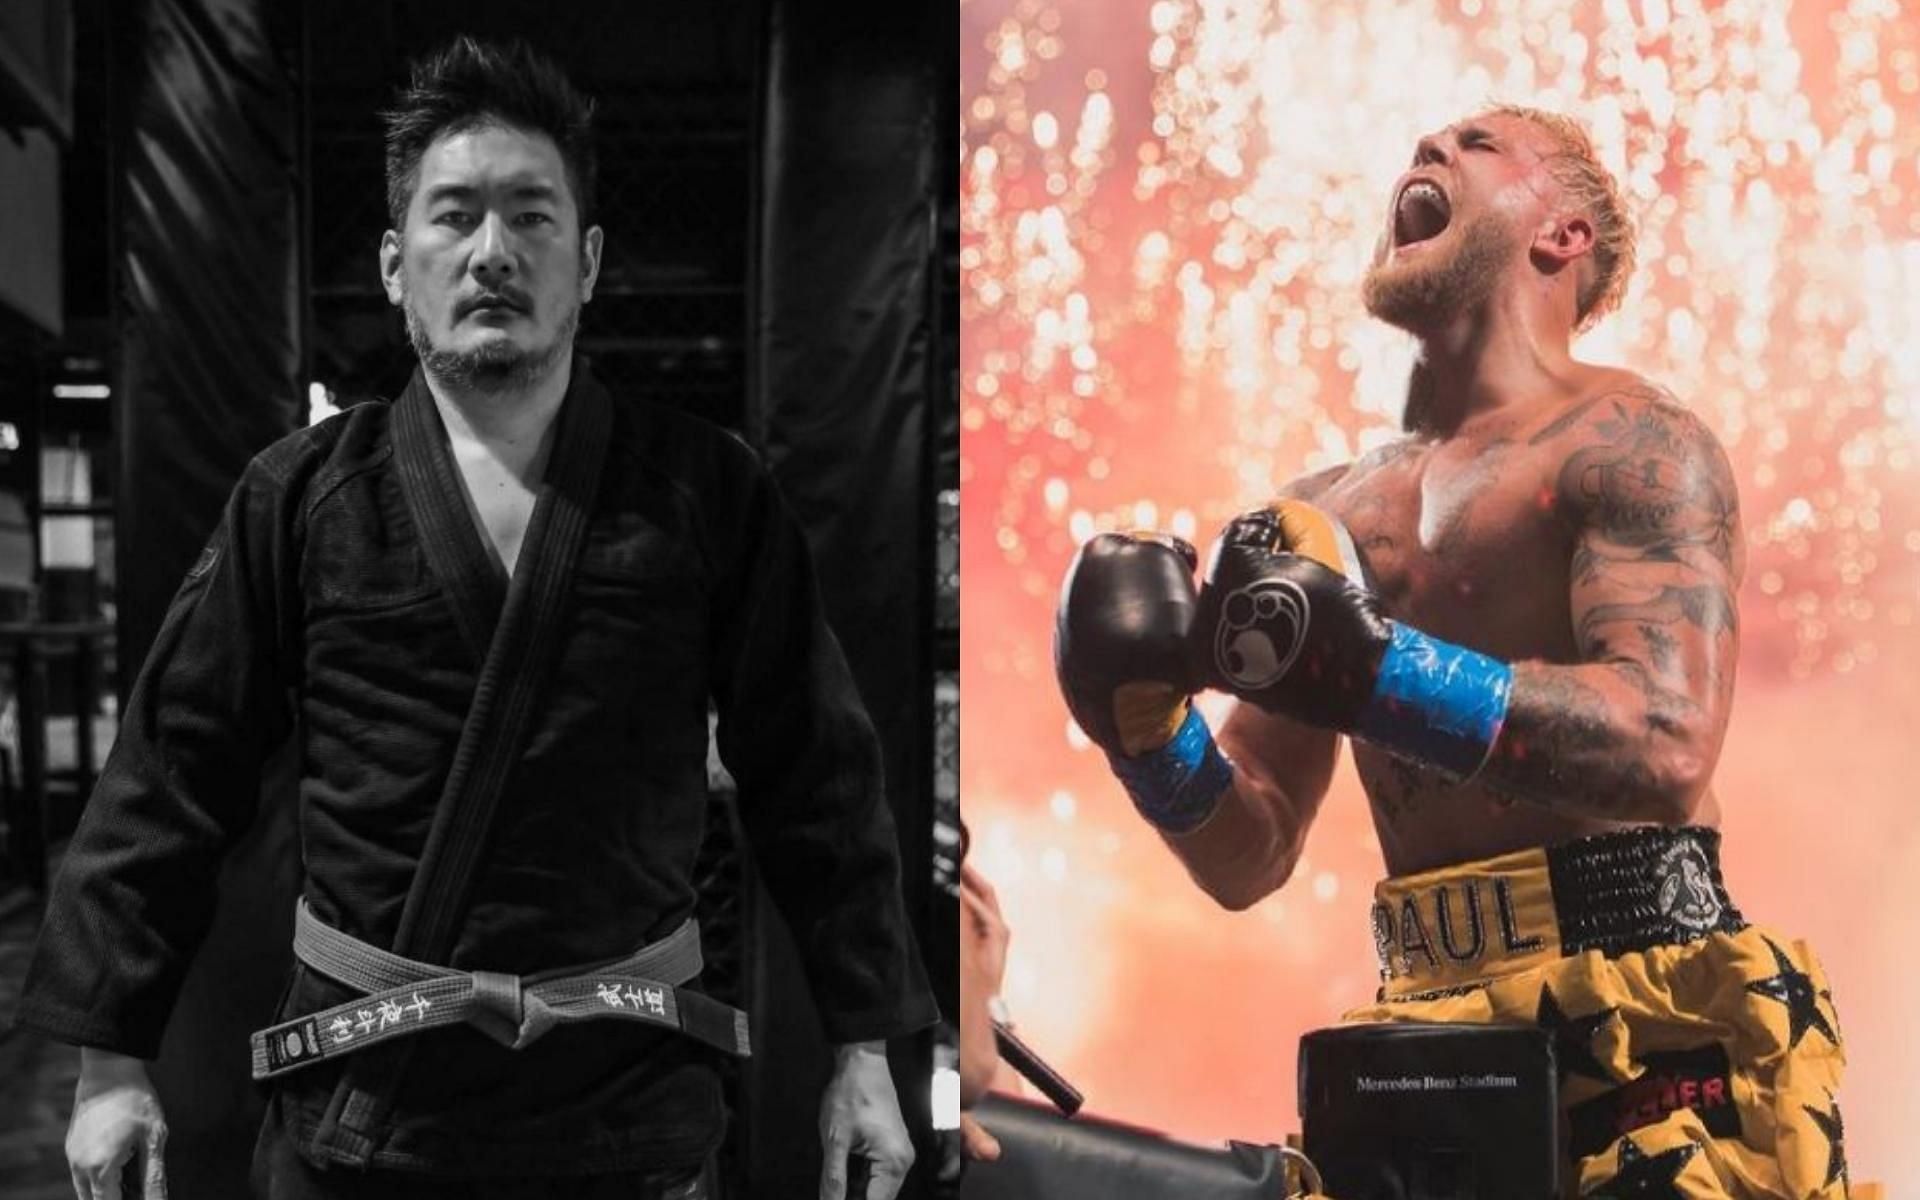 Chatri Sityodtong (left) and his fight organization ONE Championship can open new opportunities for the ultra-popular Jake Paul (right). (Images courtesy: @yodchatri and @jakepaul on Instragram)